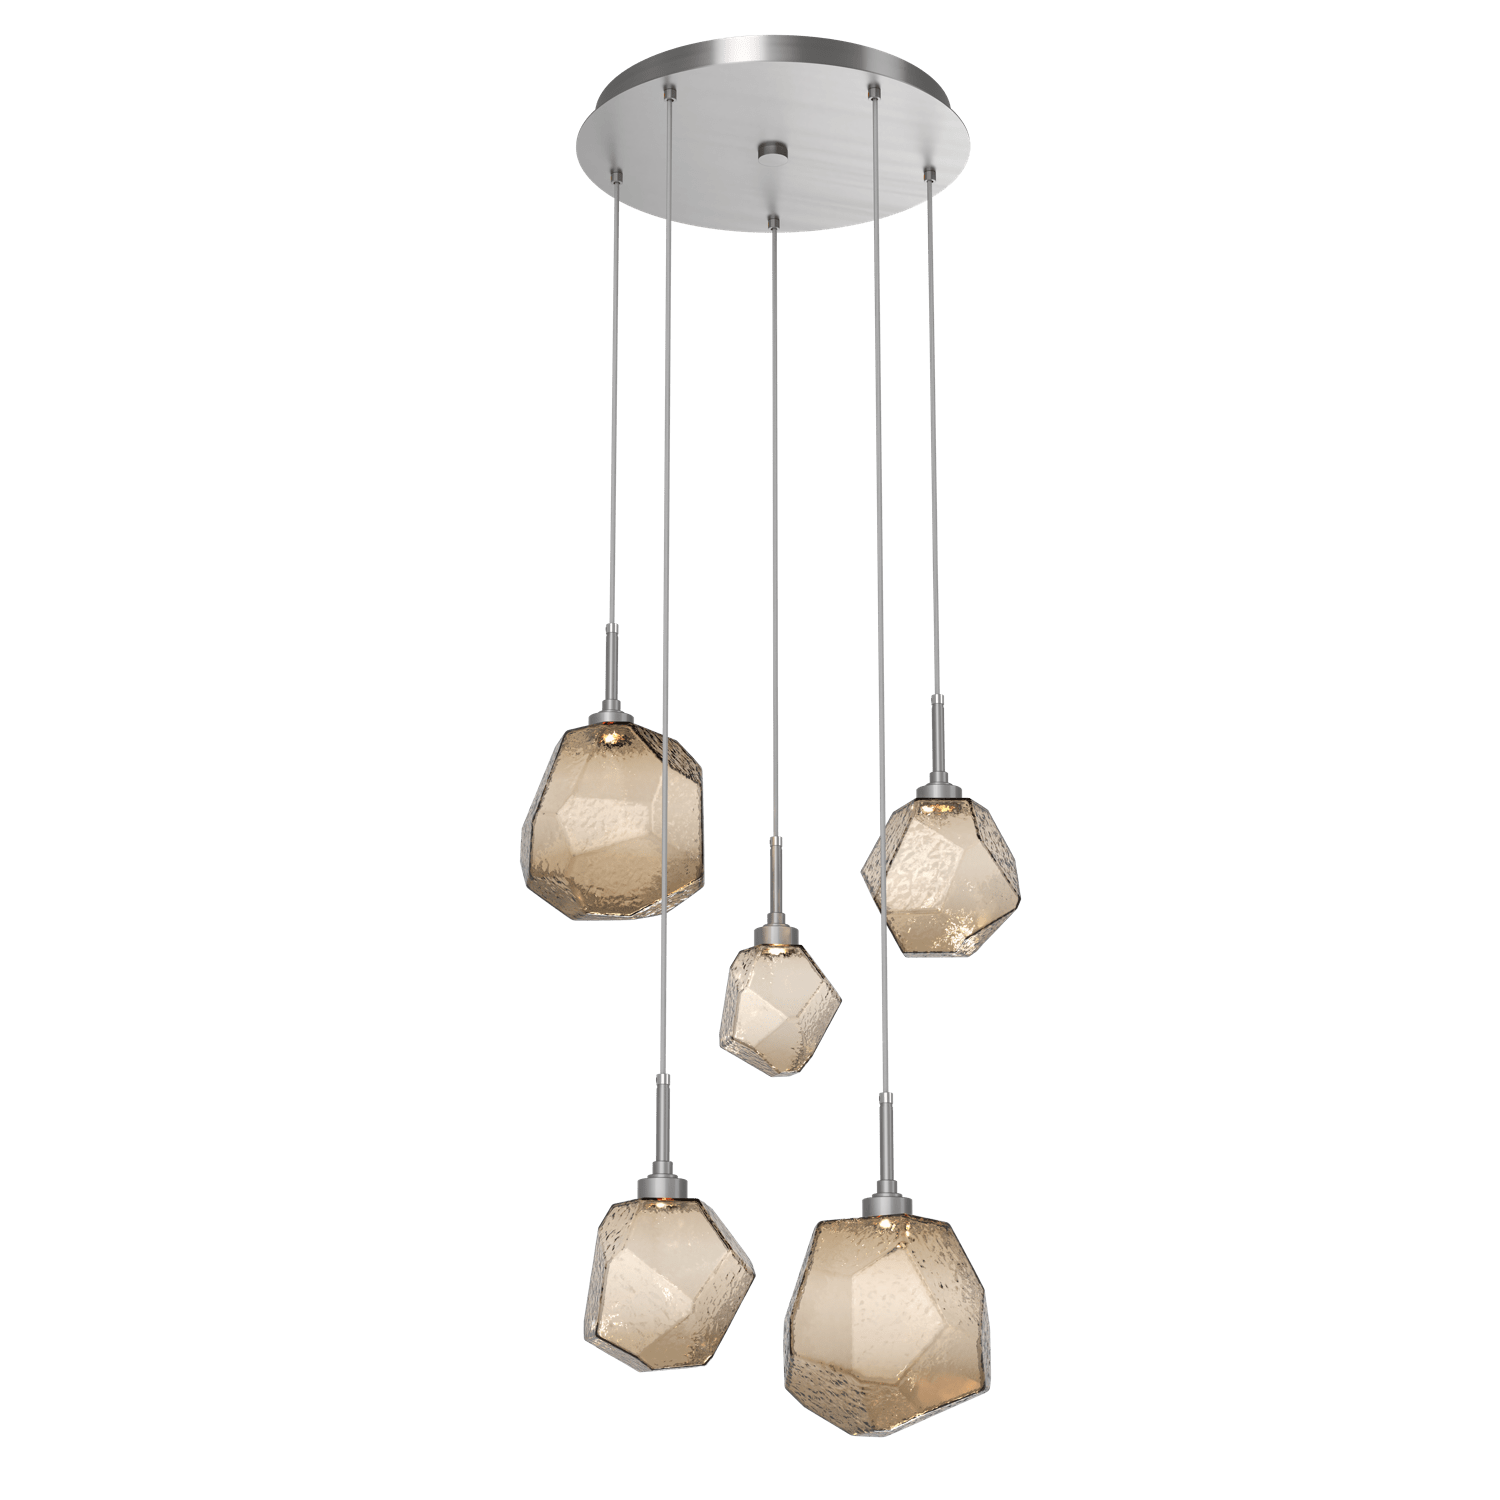 CHB0039-05-SN-B-Hammerton-Studio-Gem-5-light-round-pendant-chandelier-with-satin-nickel-finish-and-bronze-blown-glass-shades-and-LED-lamping